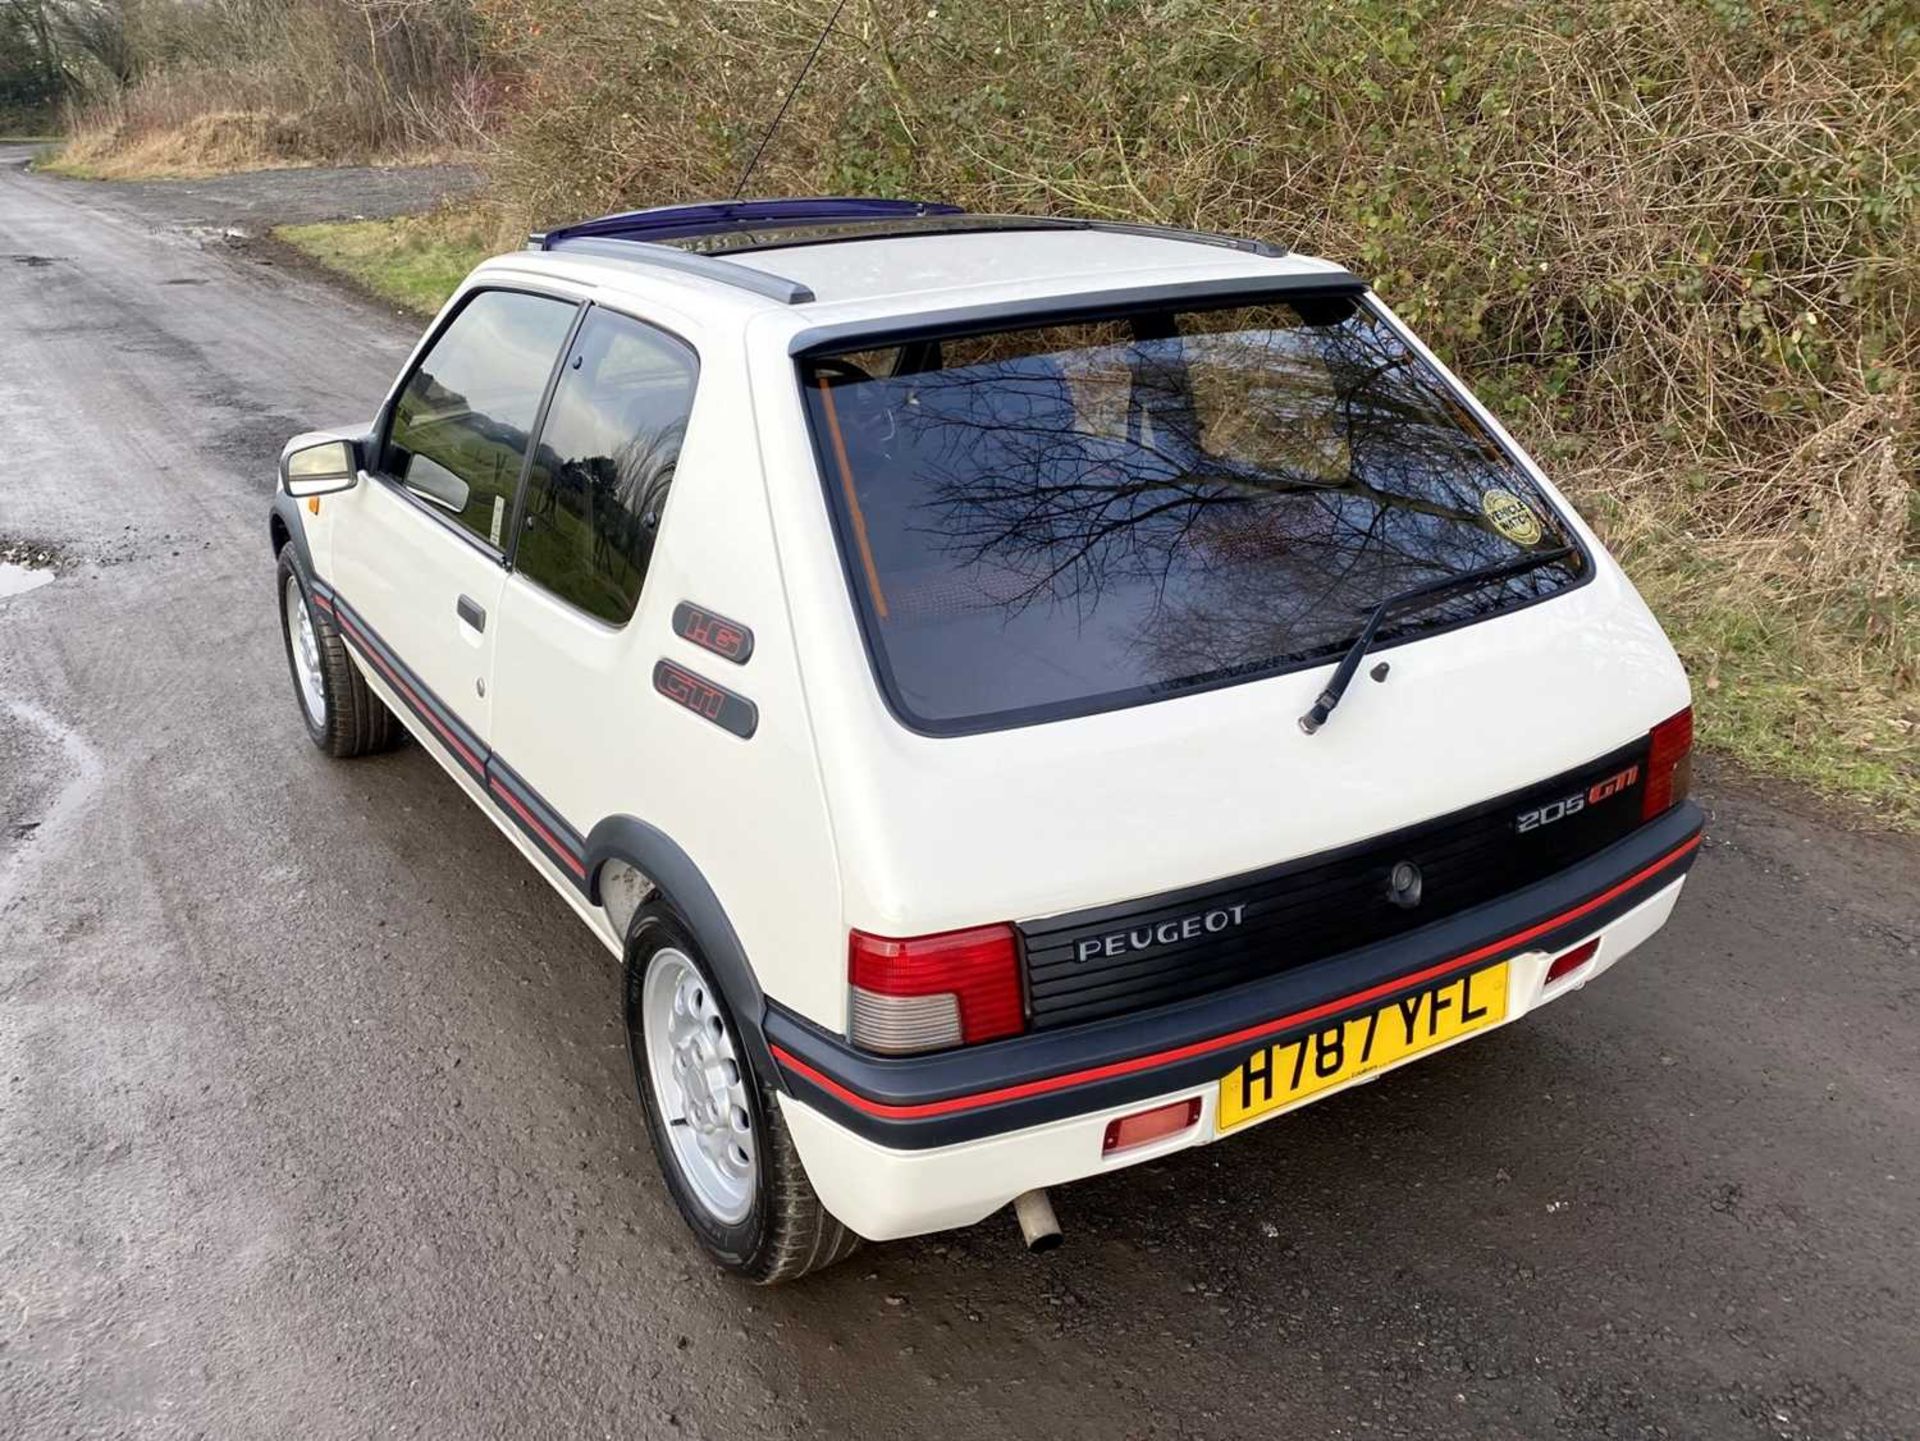 1990 Peugeot 205 GTi 1.6 Only 56,000 miles, same owner for 16 years - Image 26 of 81